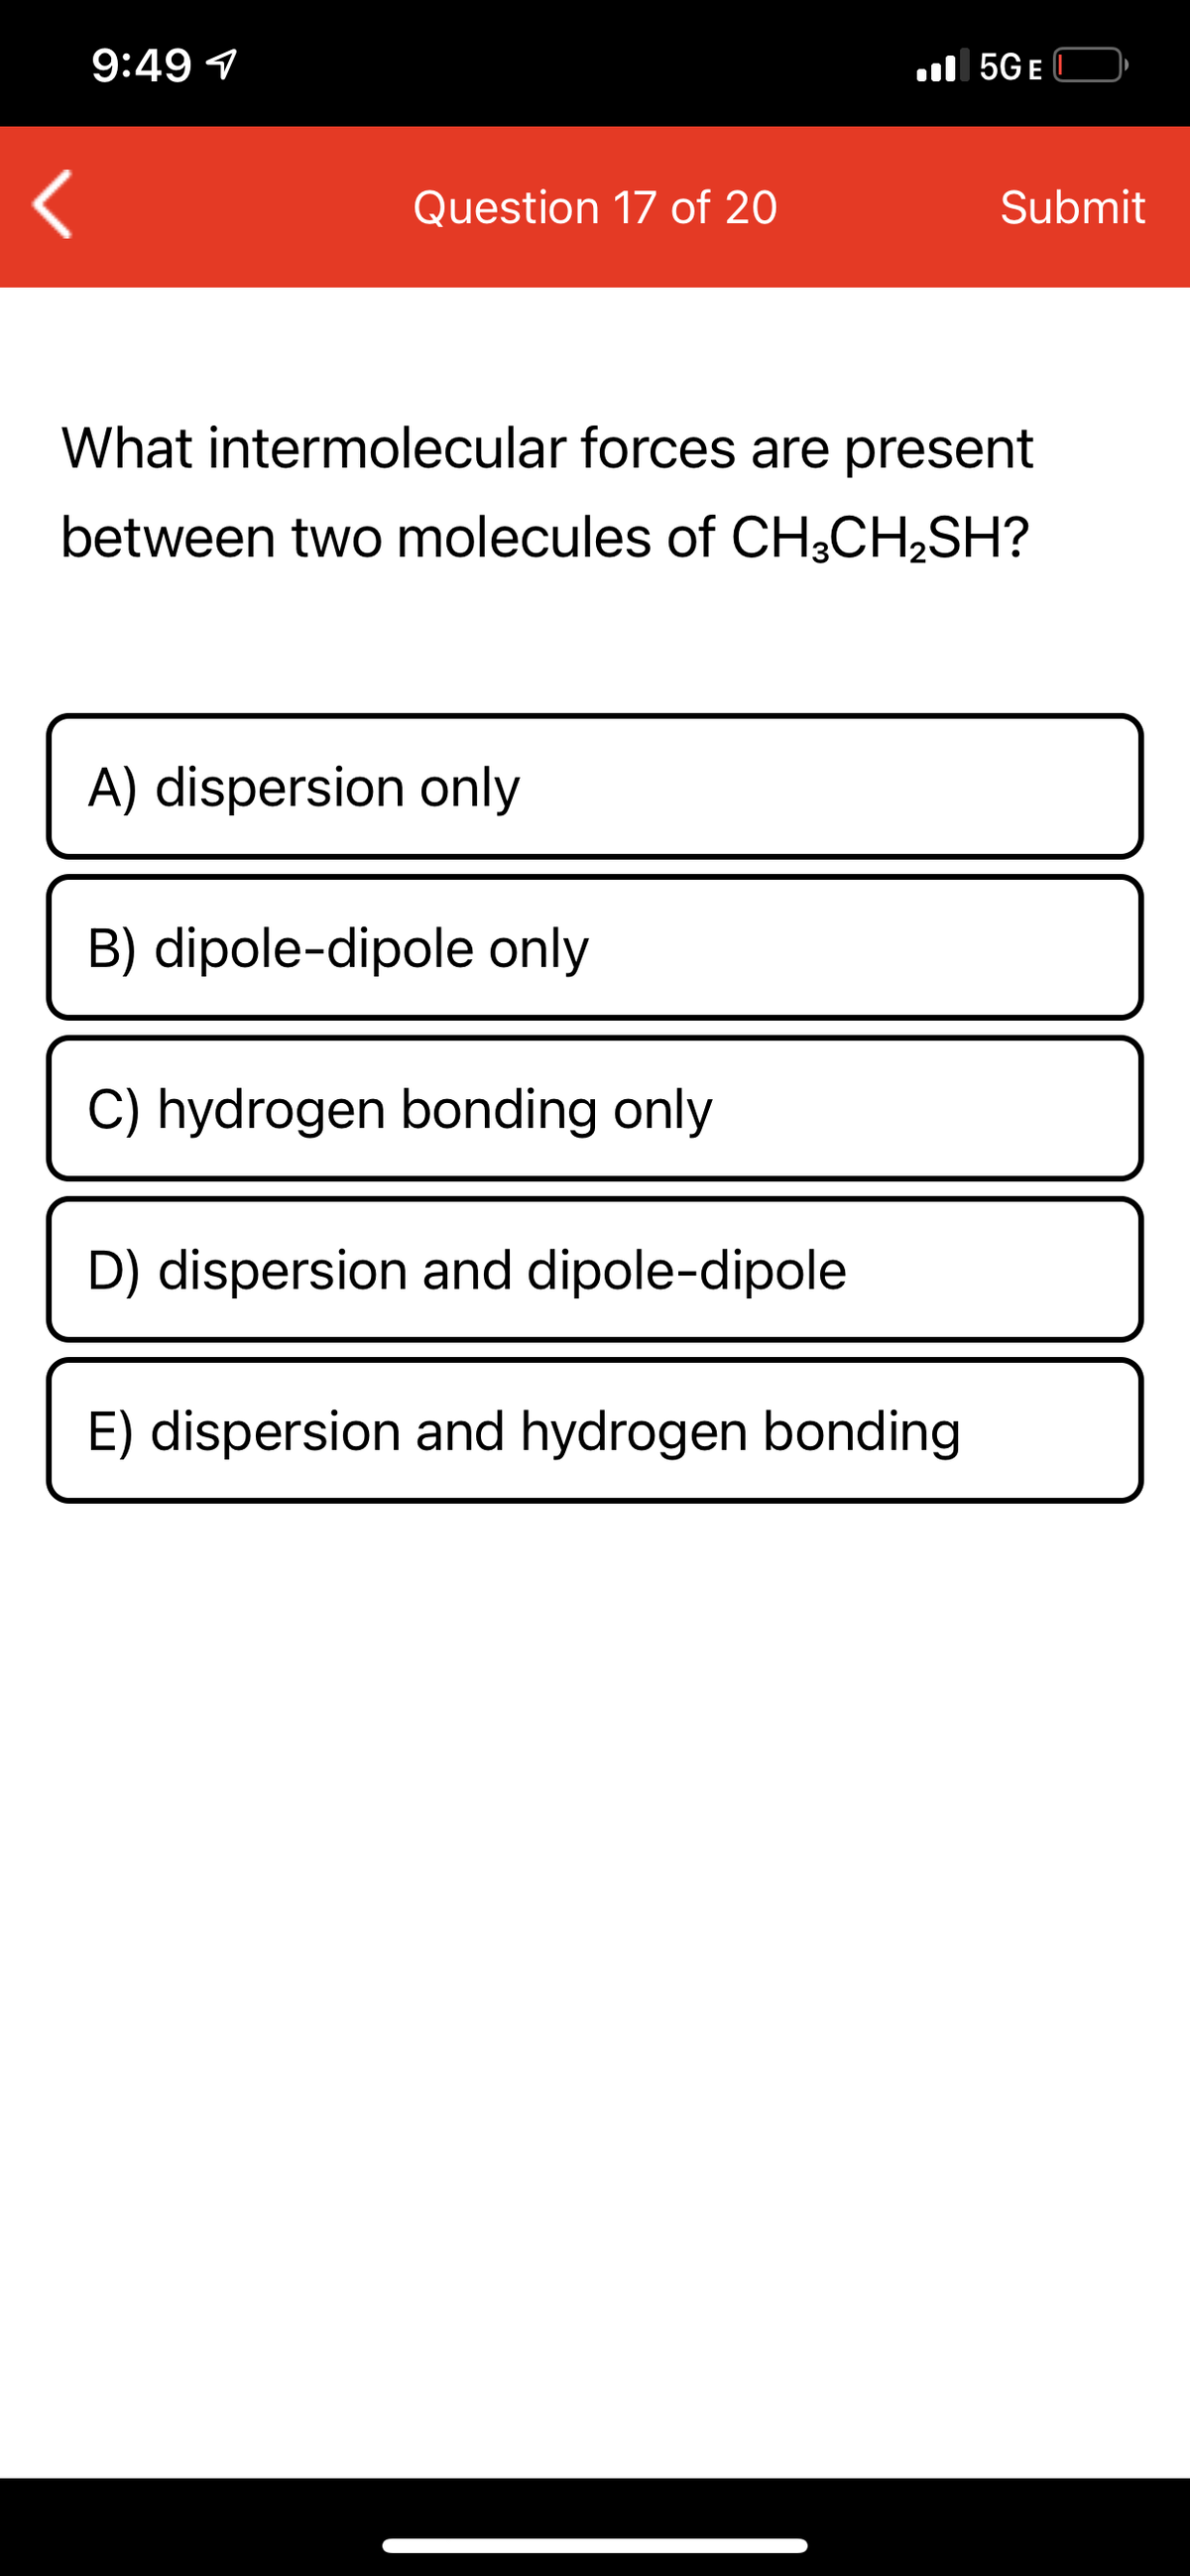 9:49 1
ll 5GE
Question 17 of 20
Submit
What intermolecular forces are present
between two molecules of CH;CH2SH?
A) dispersion only
B) dipole-dipole only
C) hydrogen bonding only
D) dispersion and dipole-dipole
E) dispersion and hydrogen bonding
